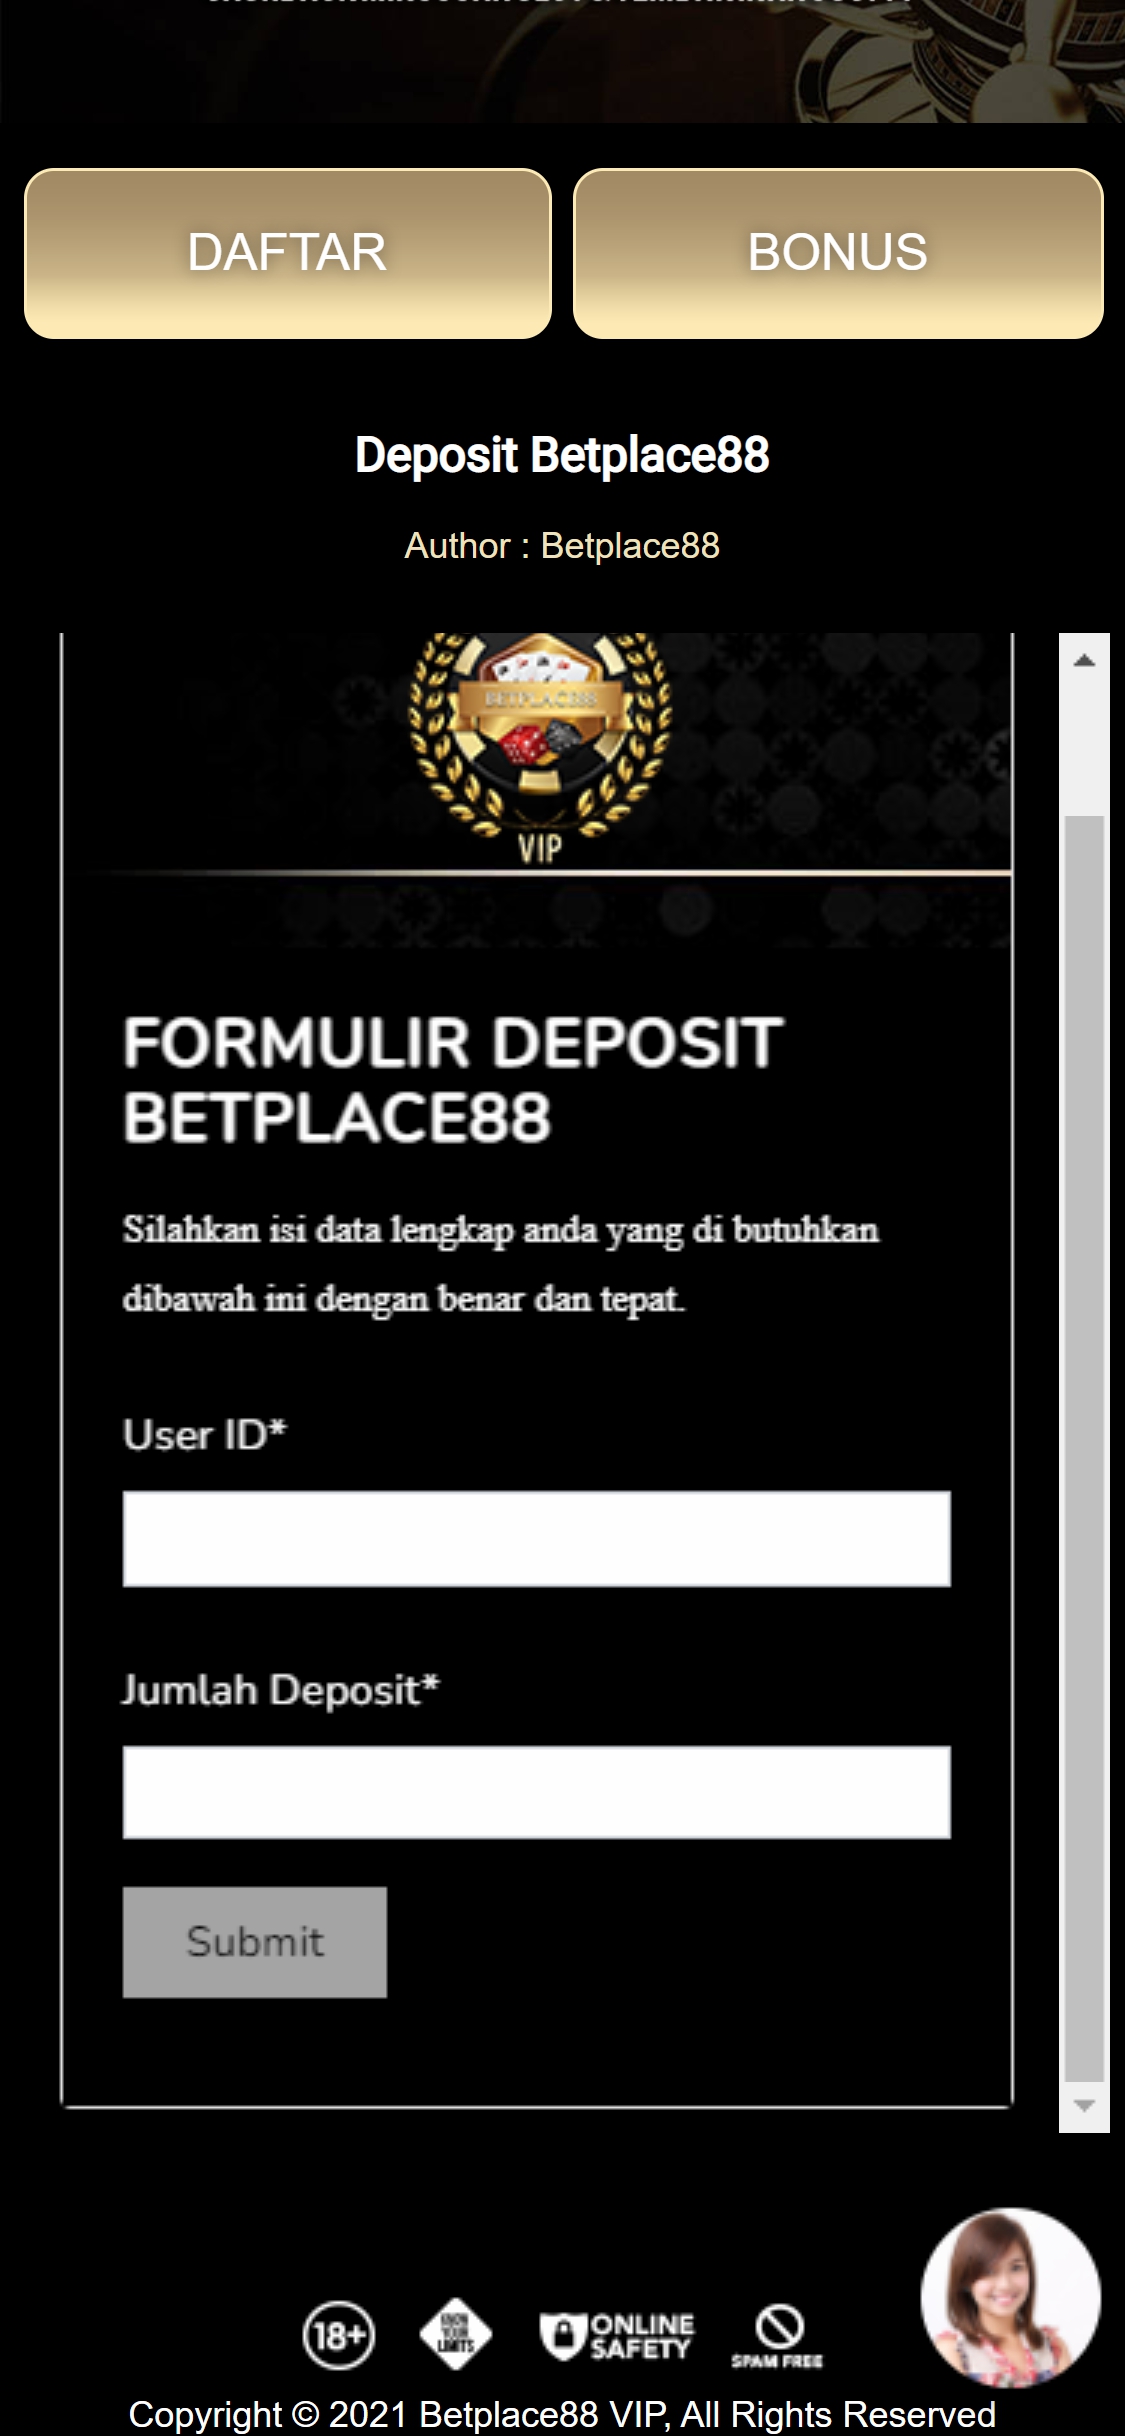 Betplace88 Casino Mobile Login Review